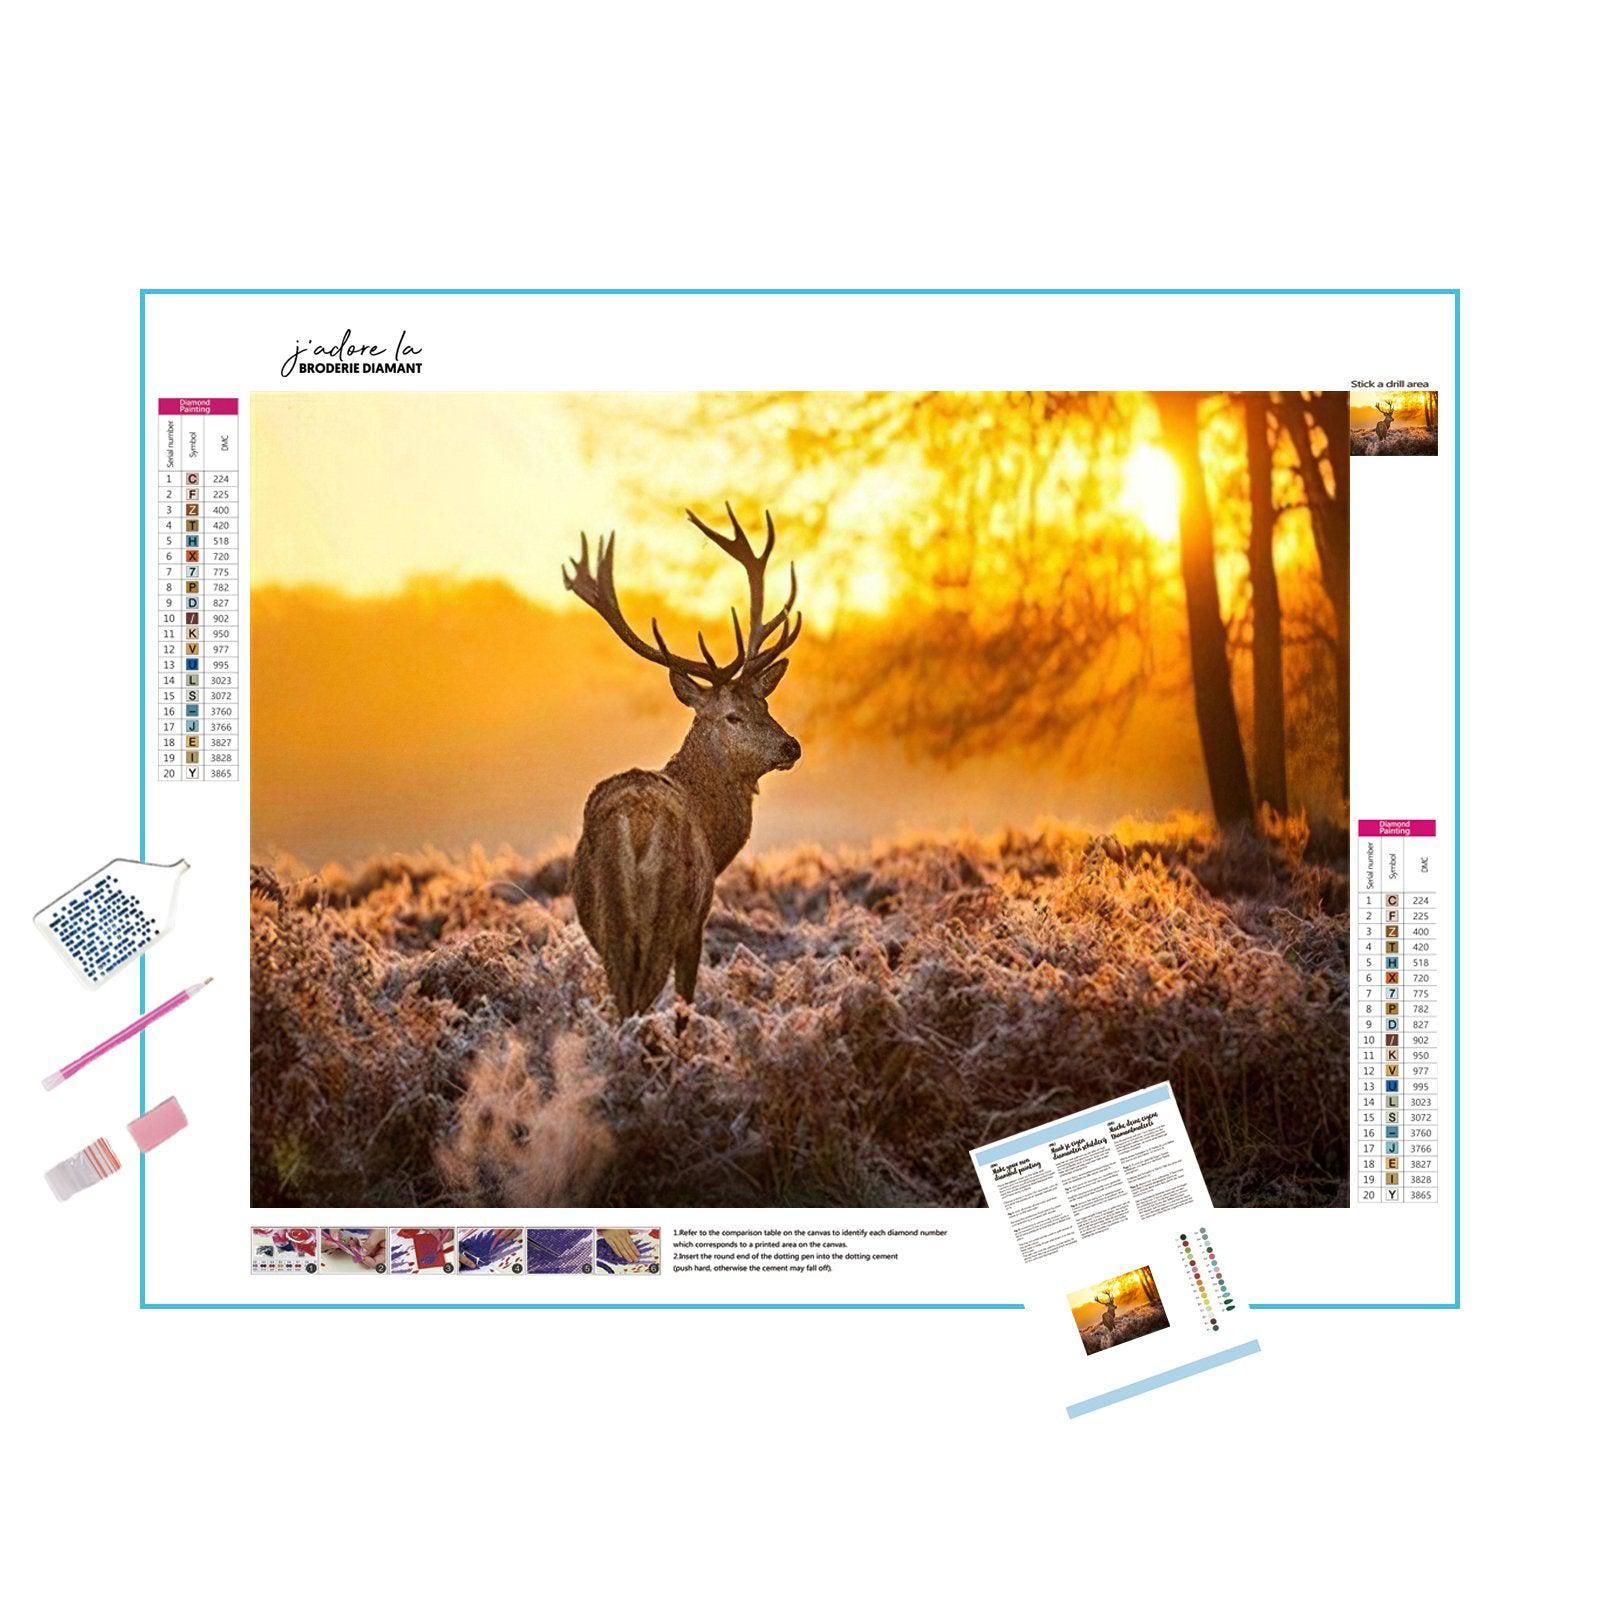 Feel the solitude and beauty with Lonely Deer And Sunshine. Lonely Deer And Sunshine - Diamondartlove